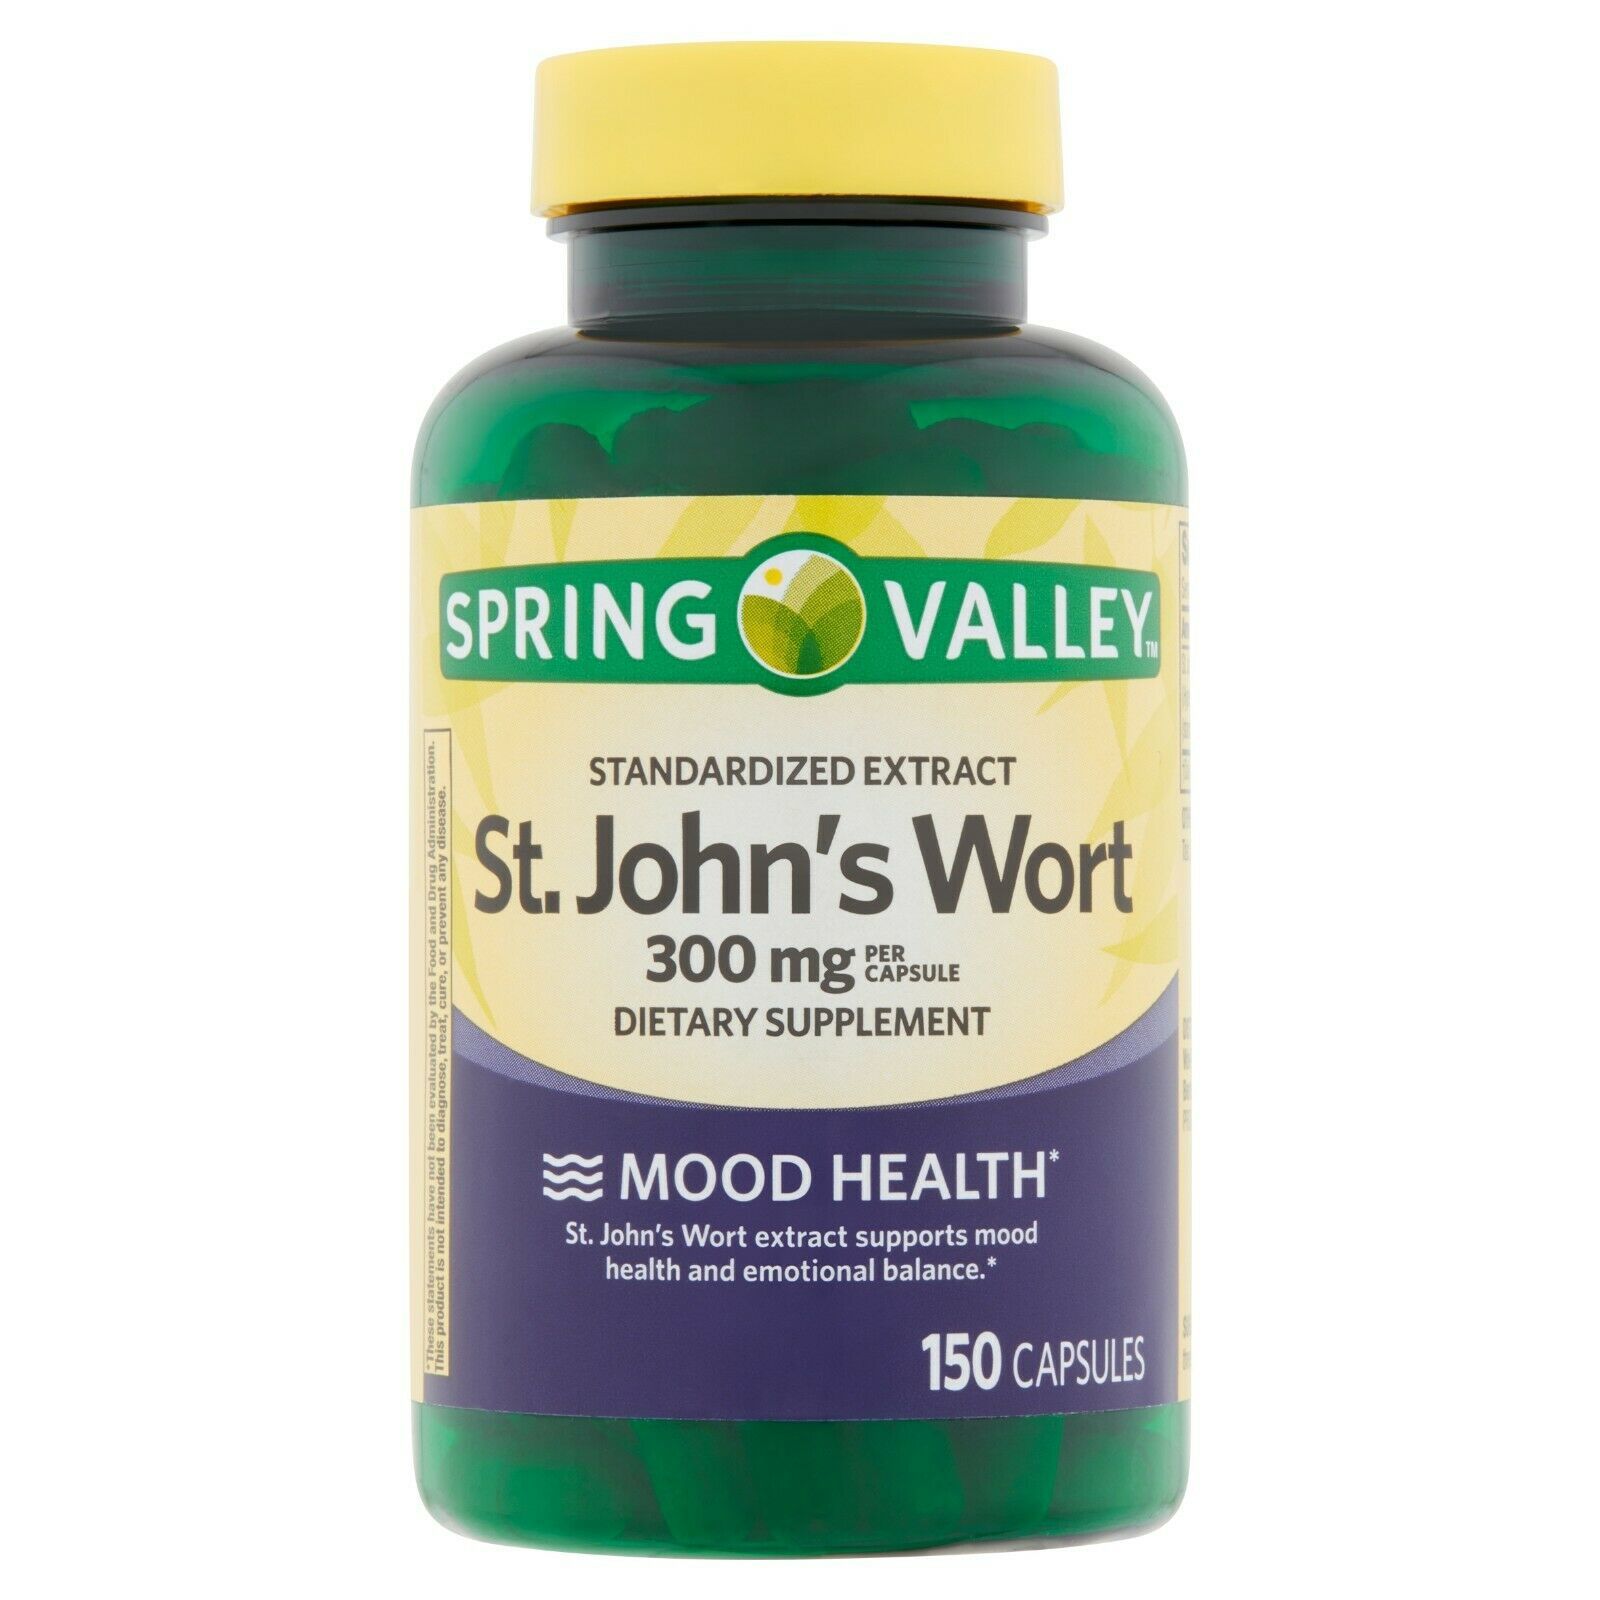 Spring Valley St. John's Wort Capsules, 300 mg, 150 counT. - $16.82